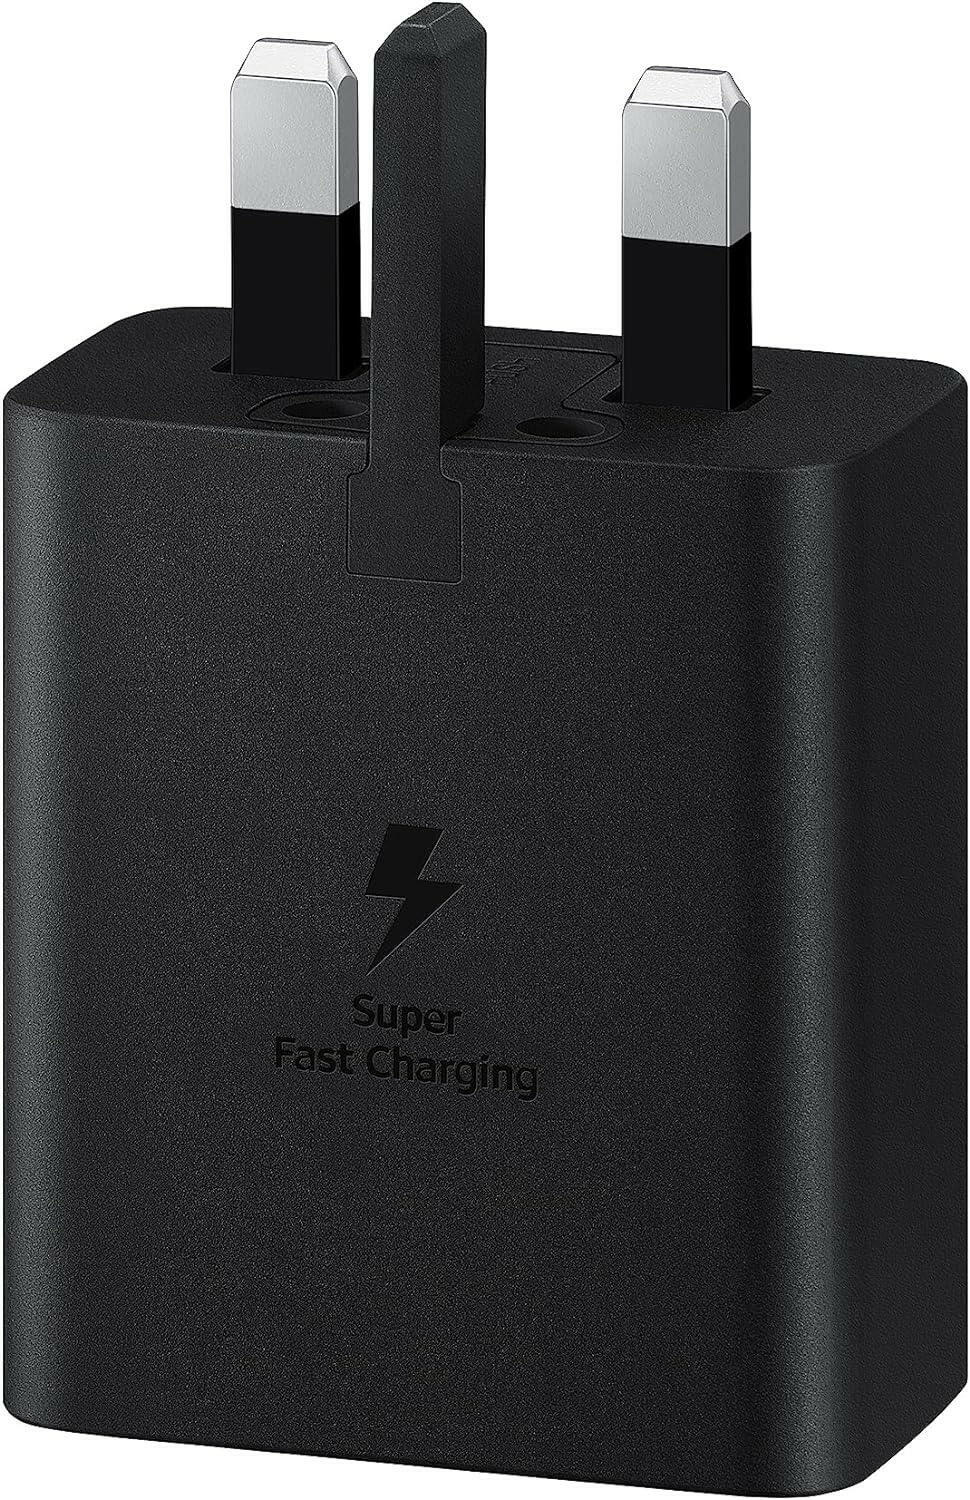 Samsung Galaxy Official 45W Travel Adapter, Super-Fast Charging (UK Plug with USB Type-C Cable), Black